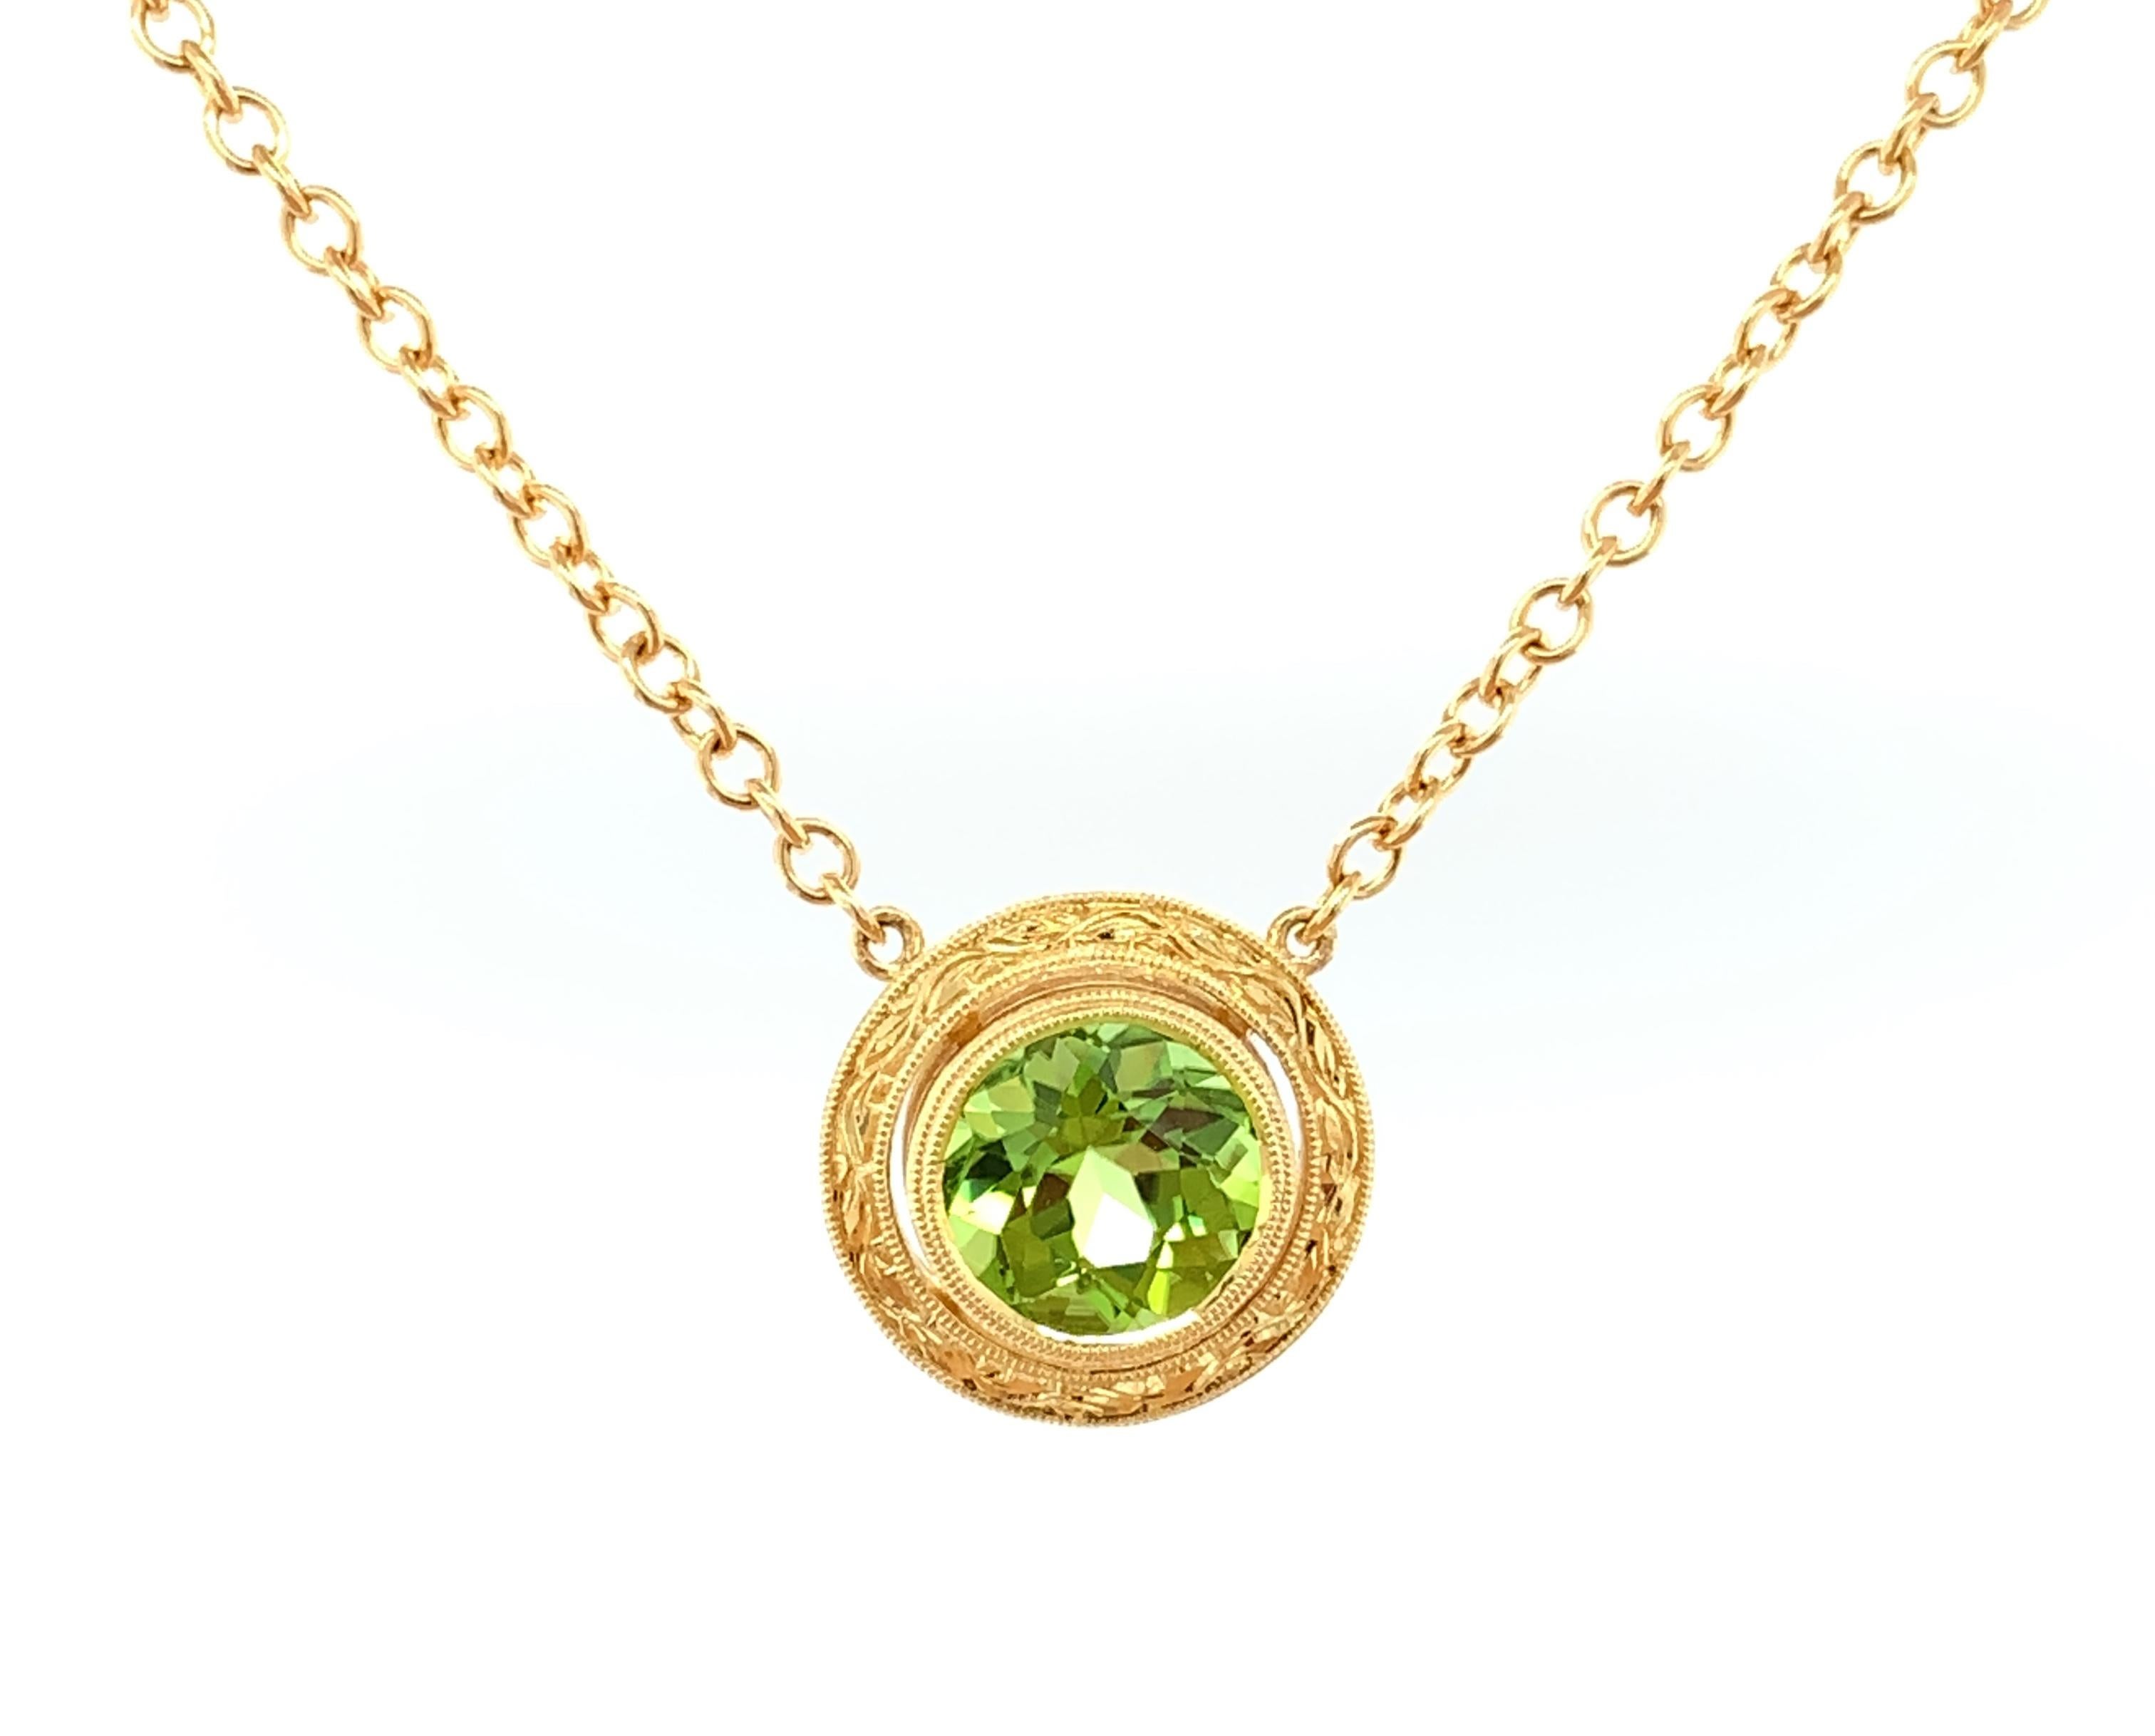 This brilliant, lime-colored peridot sparkles brightly because it is so beautifully cut. It is large for a round shaped peridot, making it a striking center stone for a necklace. It is set in an 18k yellow gold bezel that has been intricately